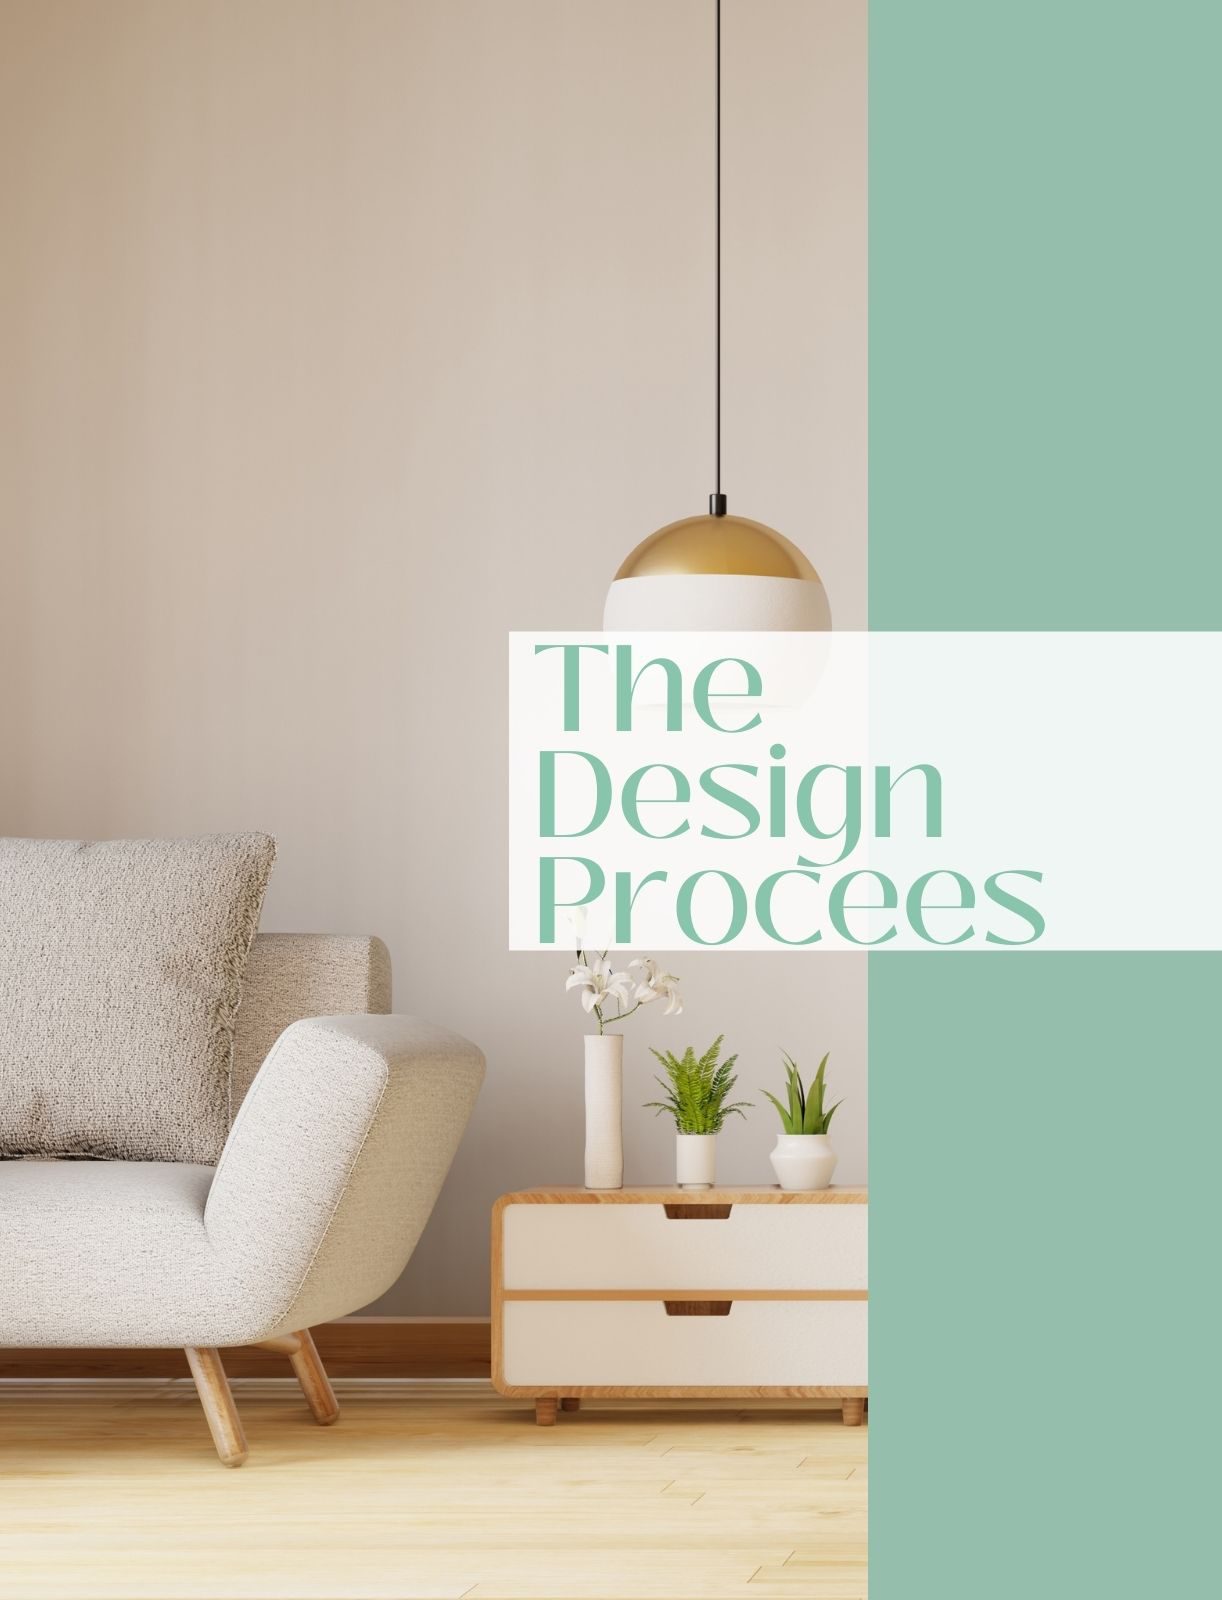 The Design Procees (1222 × 1600 px)